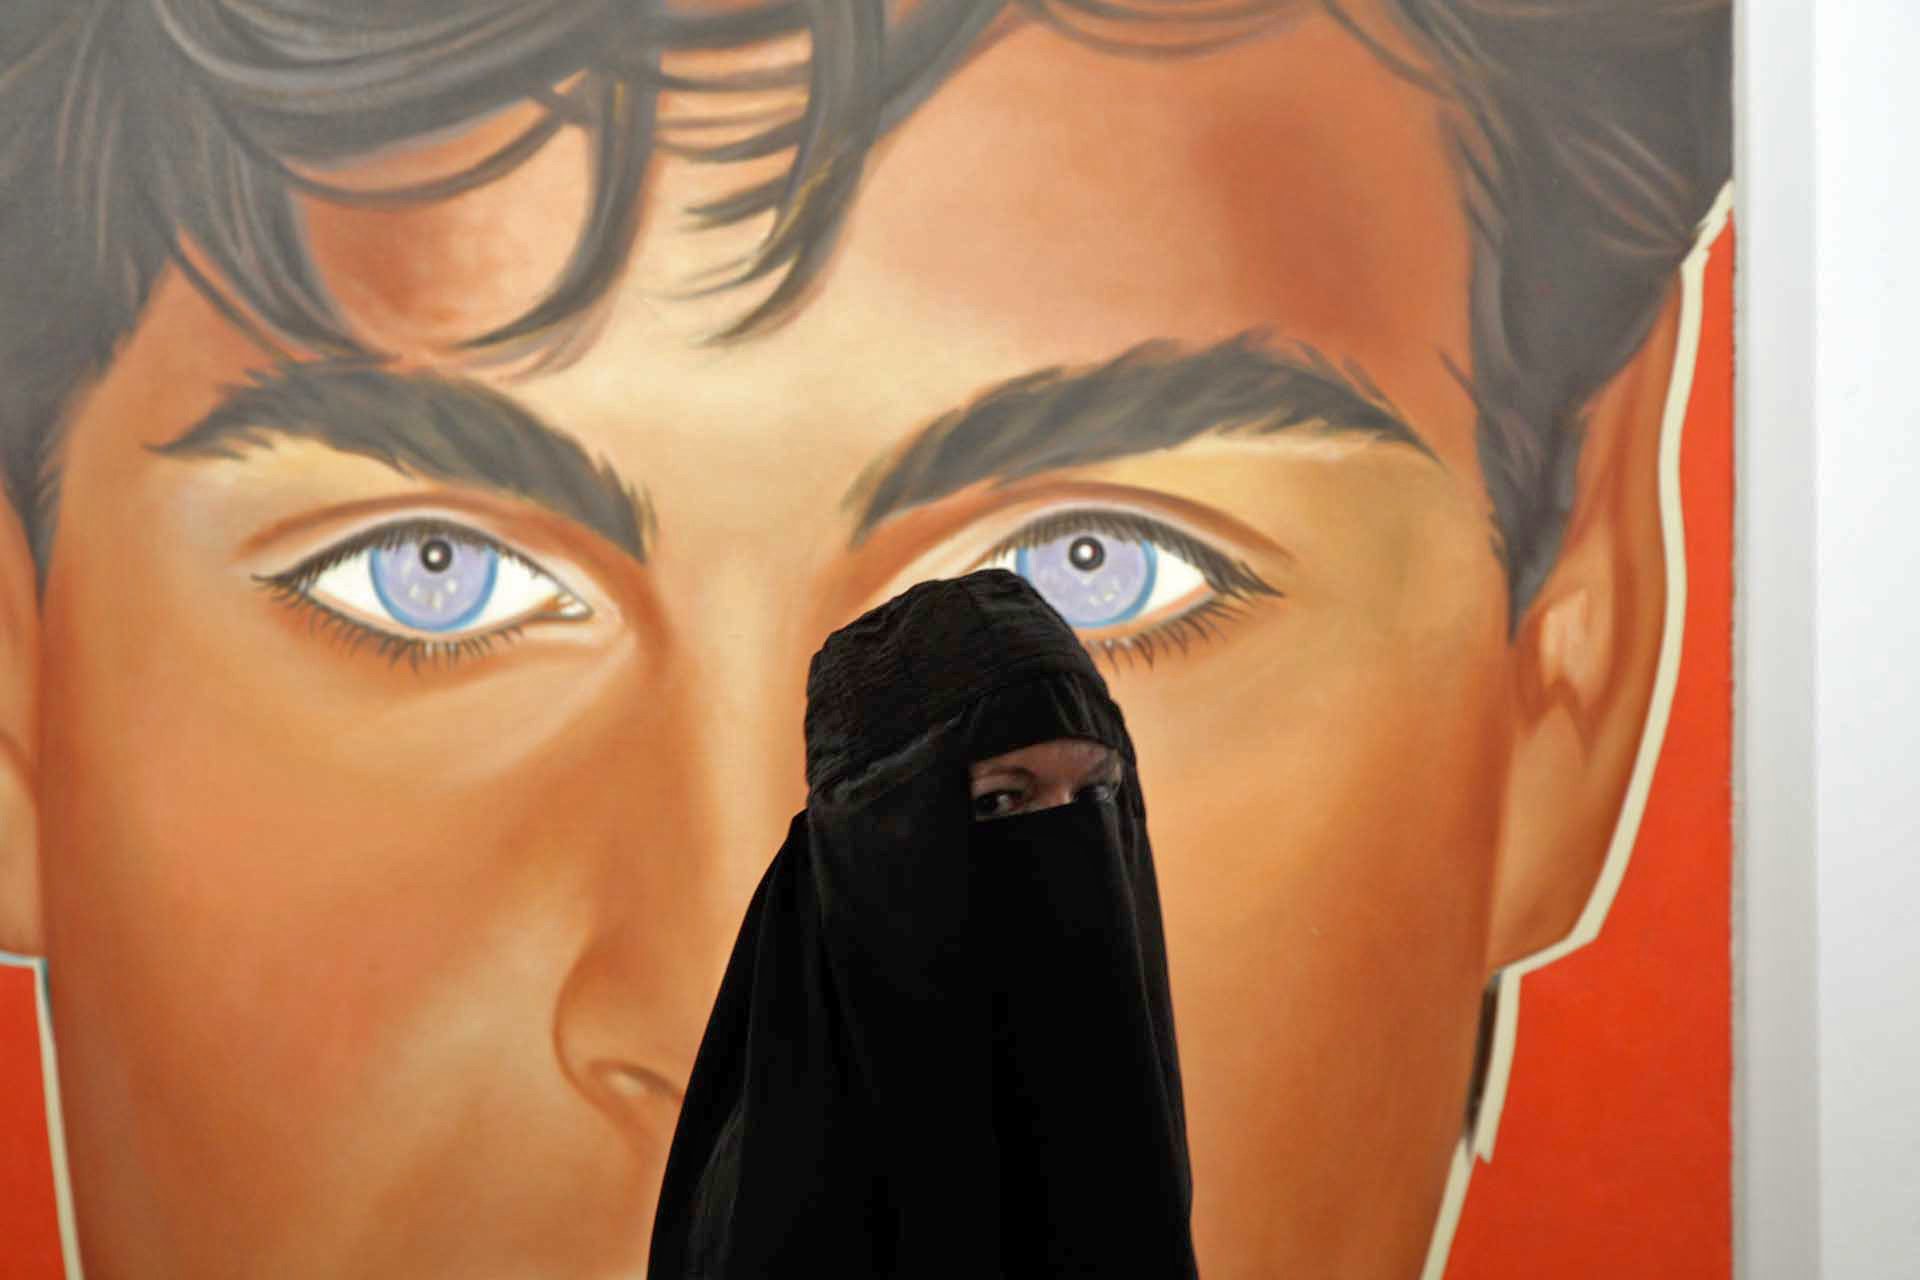 A woman wearing a burka at the art fair, in reality a performance role by Preeti Chandrakant, here in front of a painting at the opening of Art 41, 2010